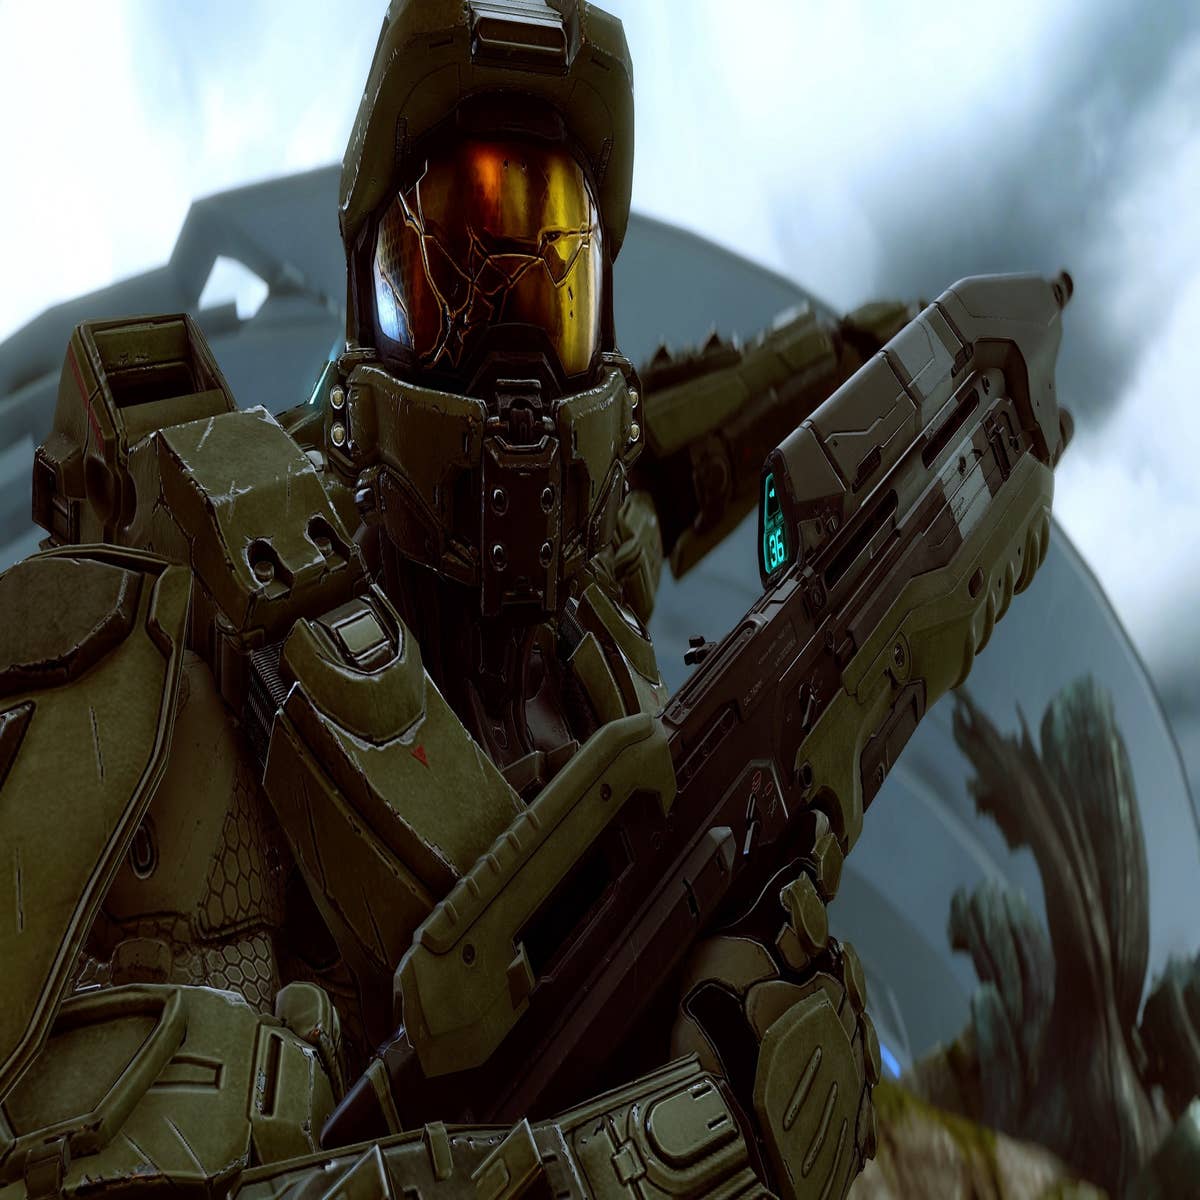 Inside the Halo TV series' plan for Master Chief, story beyond games -  Polygon